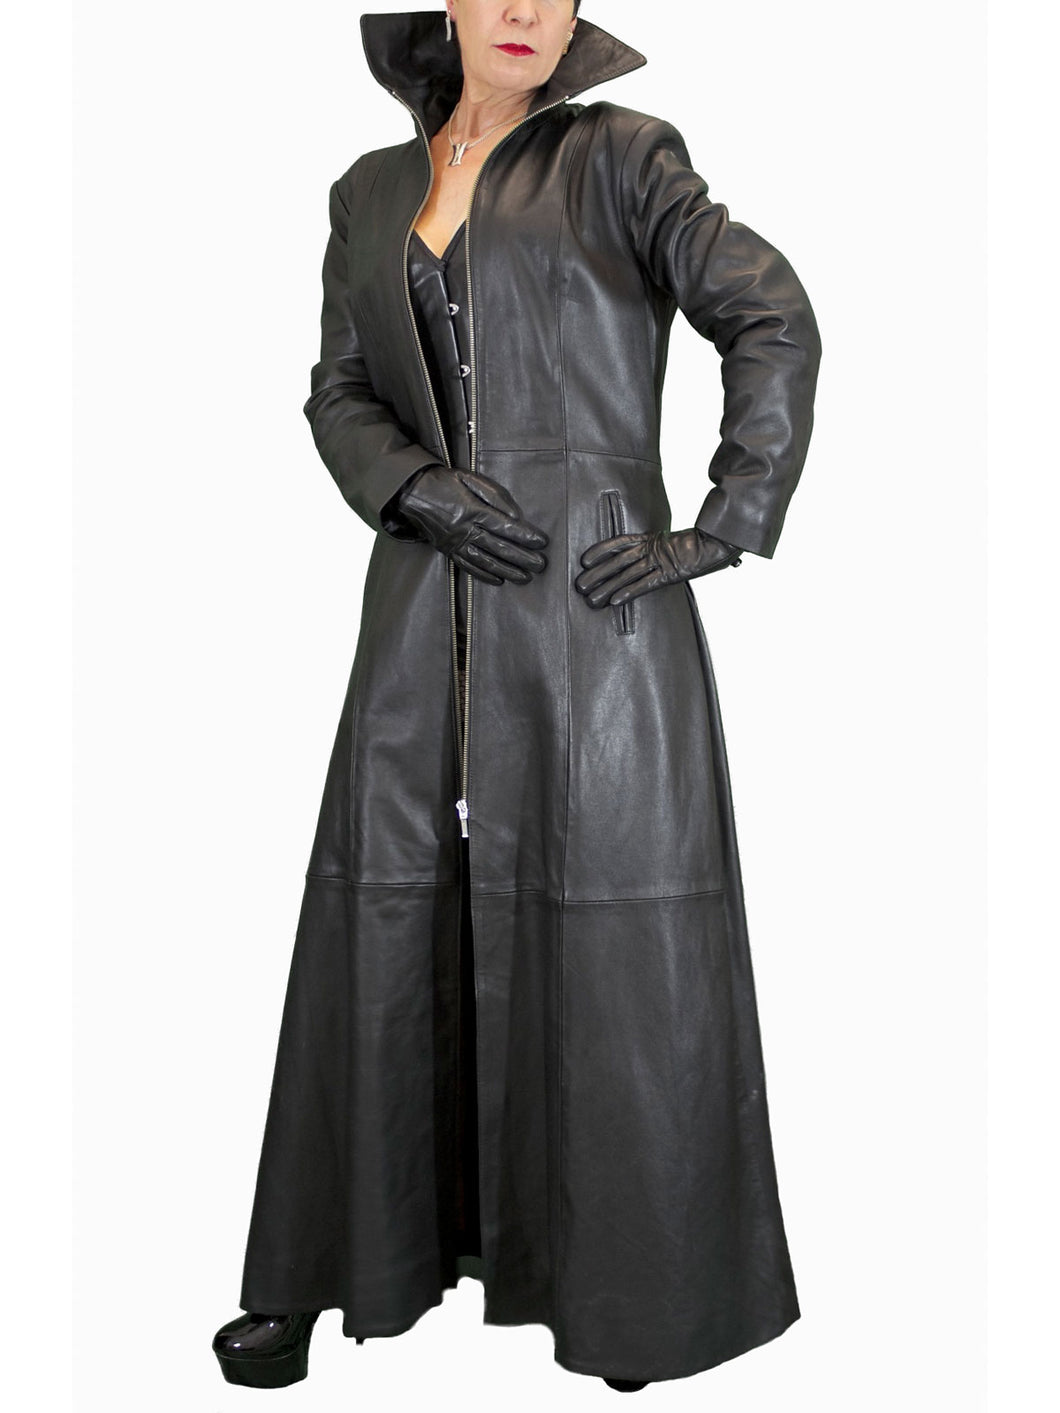 Women Genuine Leather Fashion Extra Long Coat (Free Home Delivery Within 7 To 10 Days Worldwide)